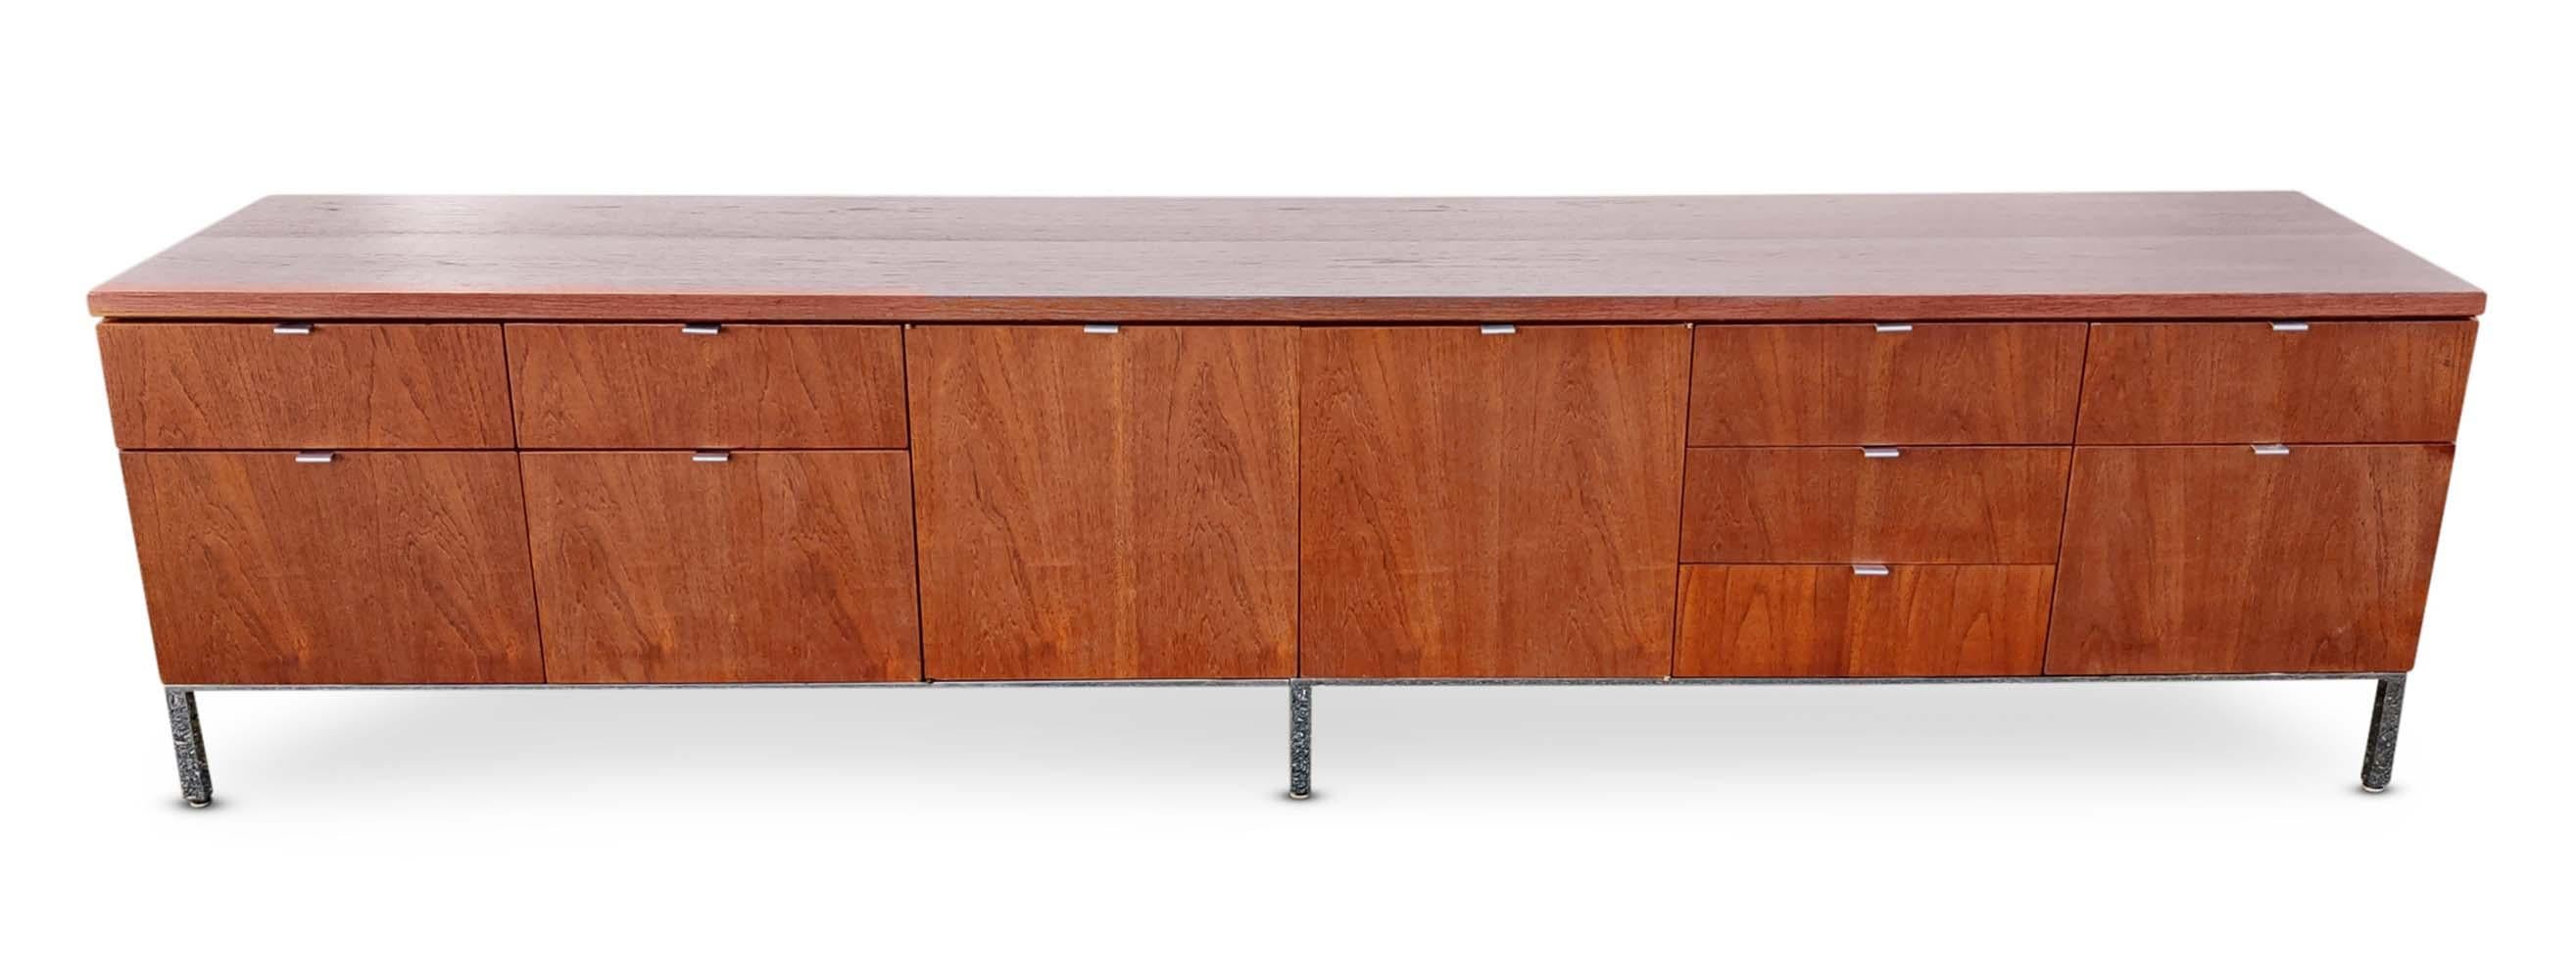 Florence Knoll Attr. Restored Low & Long , Teak & Chrome Credenza Circa 1960s MCM 7